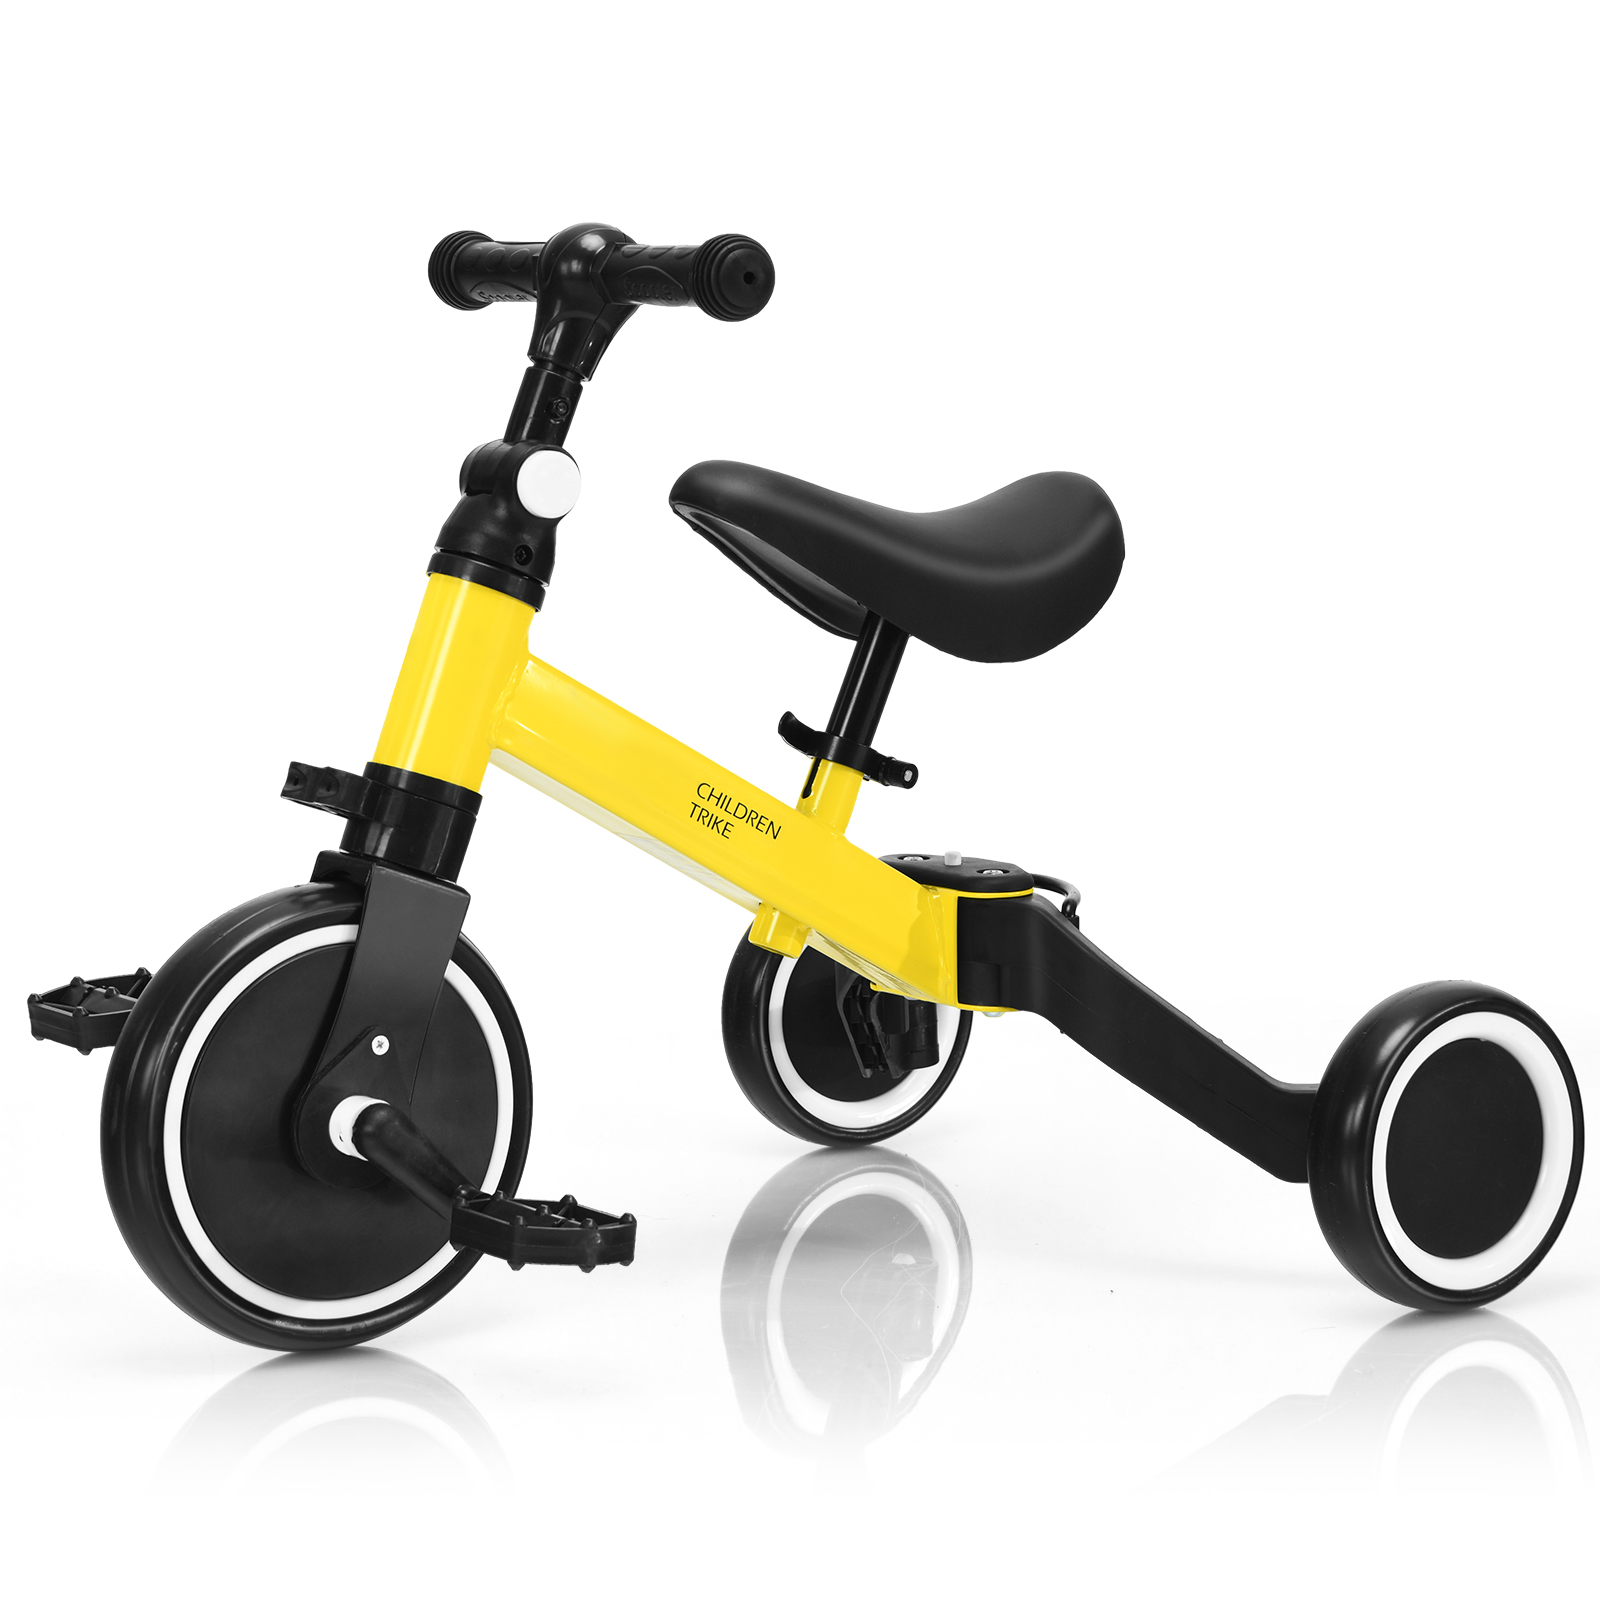 Convertible Balance Bike Kids Trike with Detachable Pedal for 1-4 Years Old Kids-Yellow